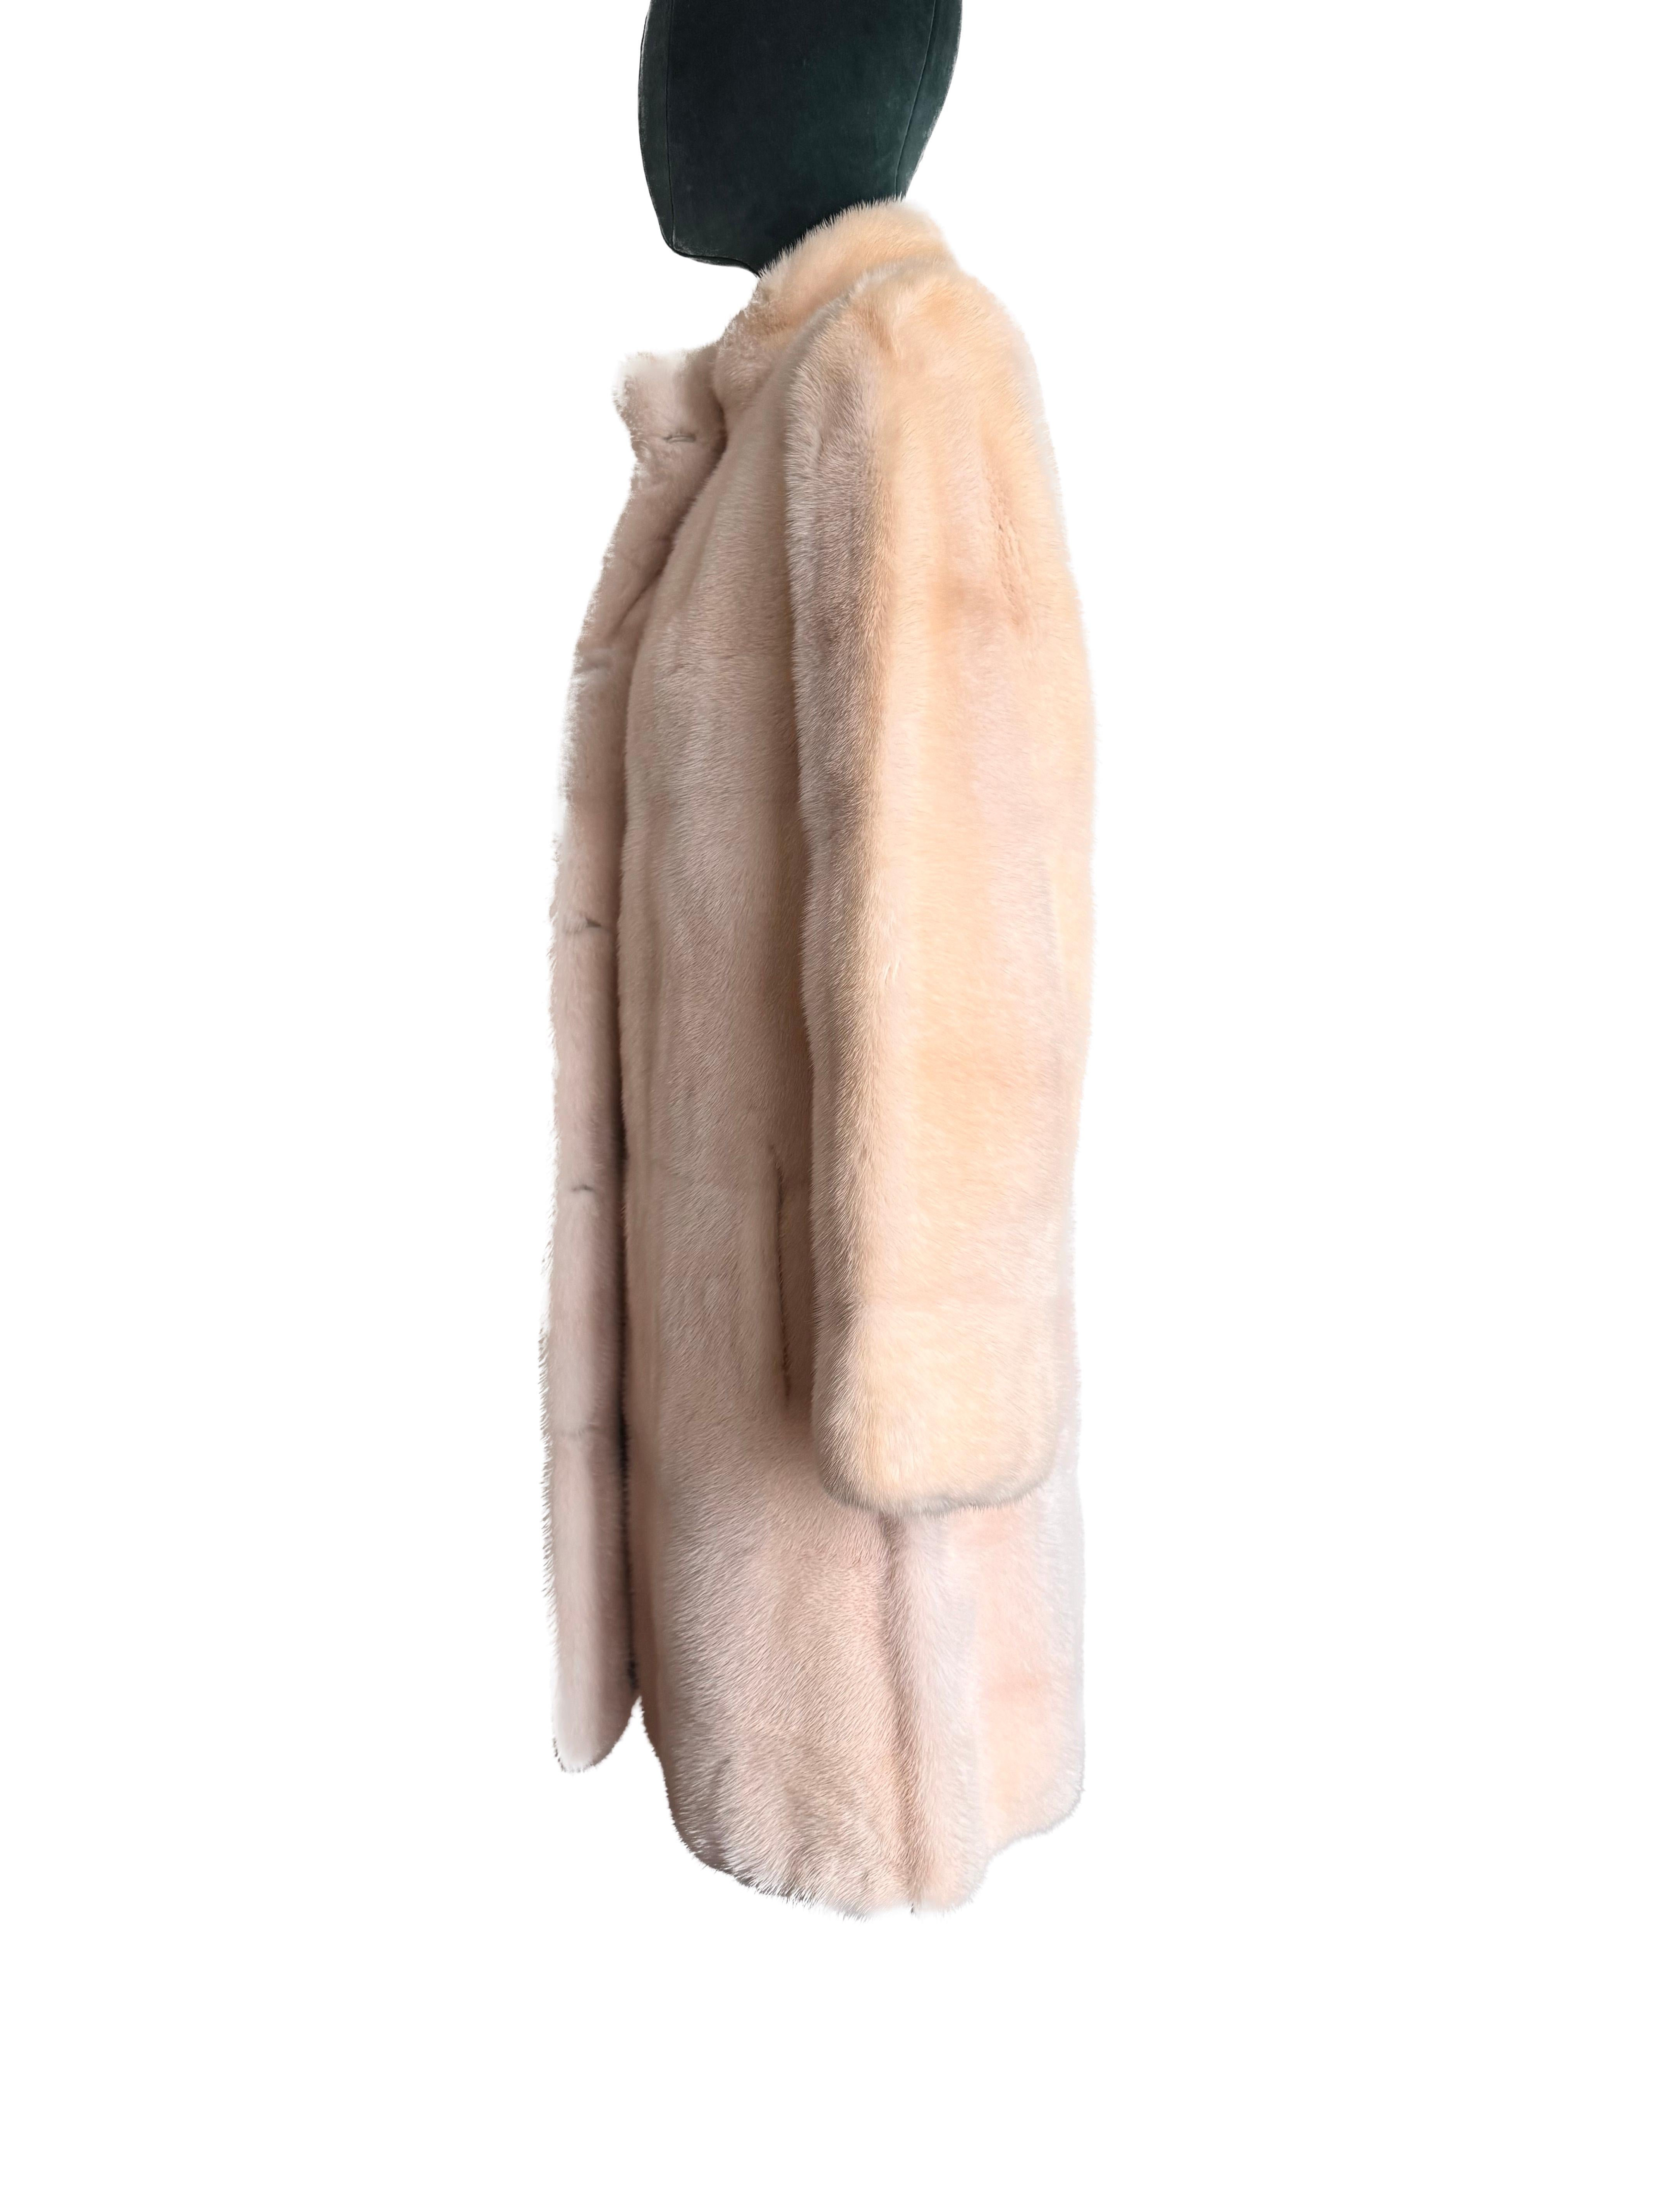 Indulge in the epitome of luxury and elegance with this exquisite natural pearl mink coat. Crafted to perfection, this brand new garment, complete with its original tags, presents a timeless allure and unparalleled sophistication. Designed in a